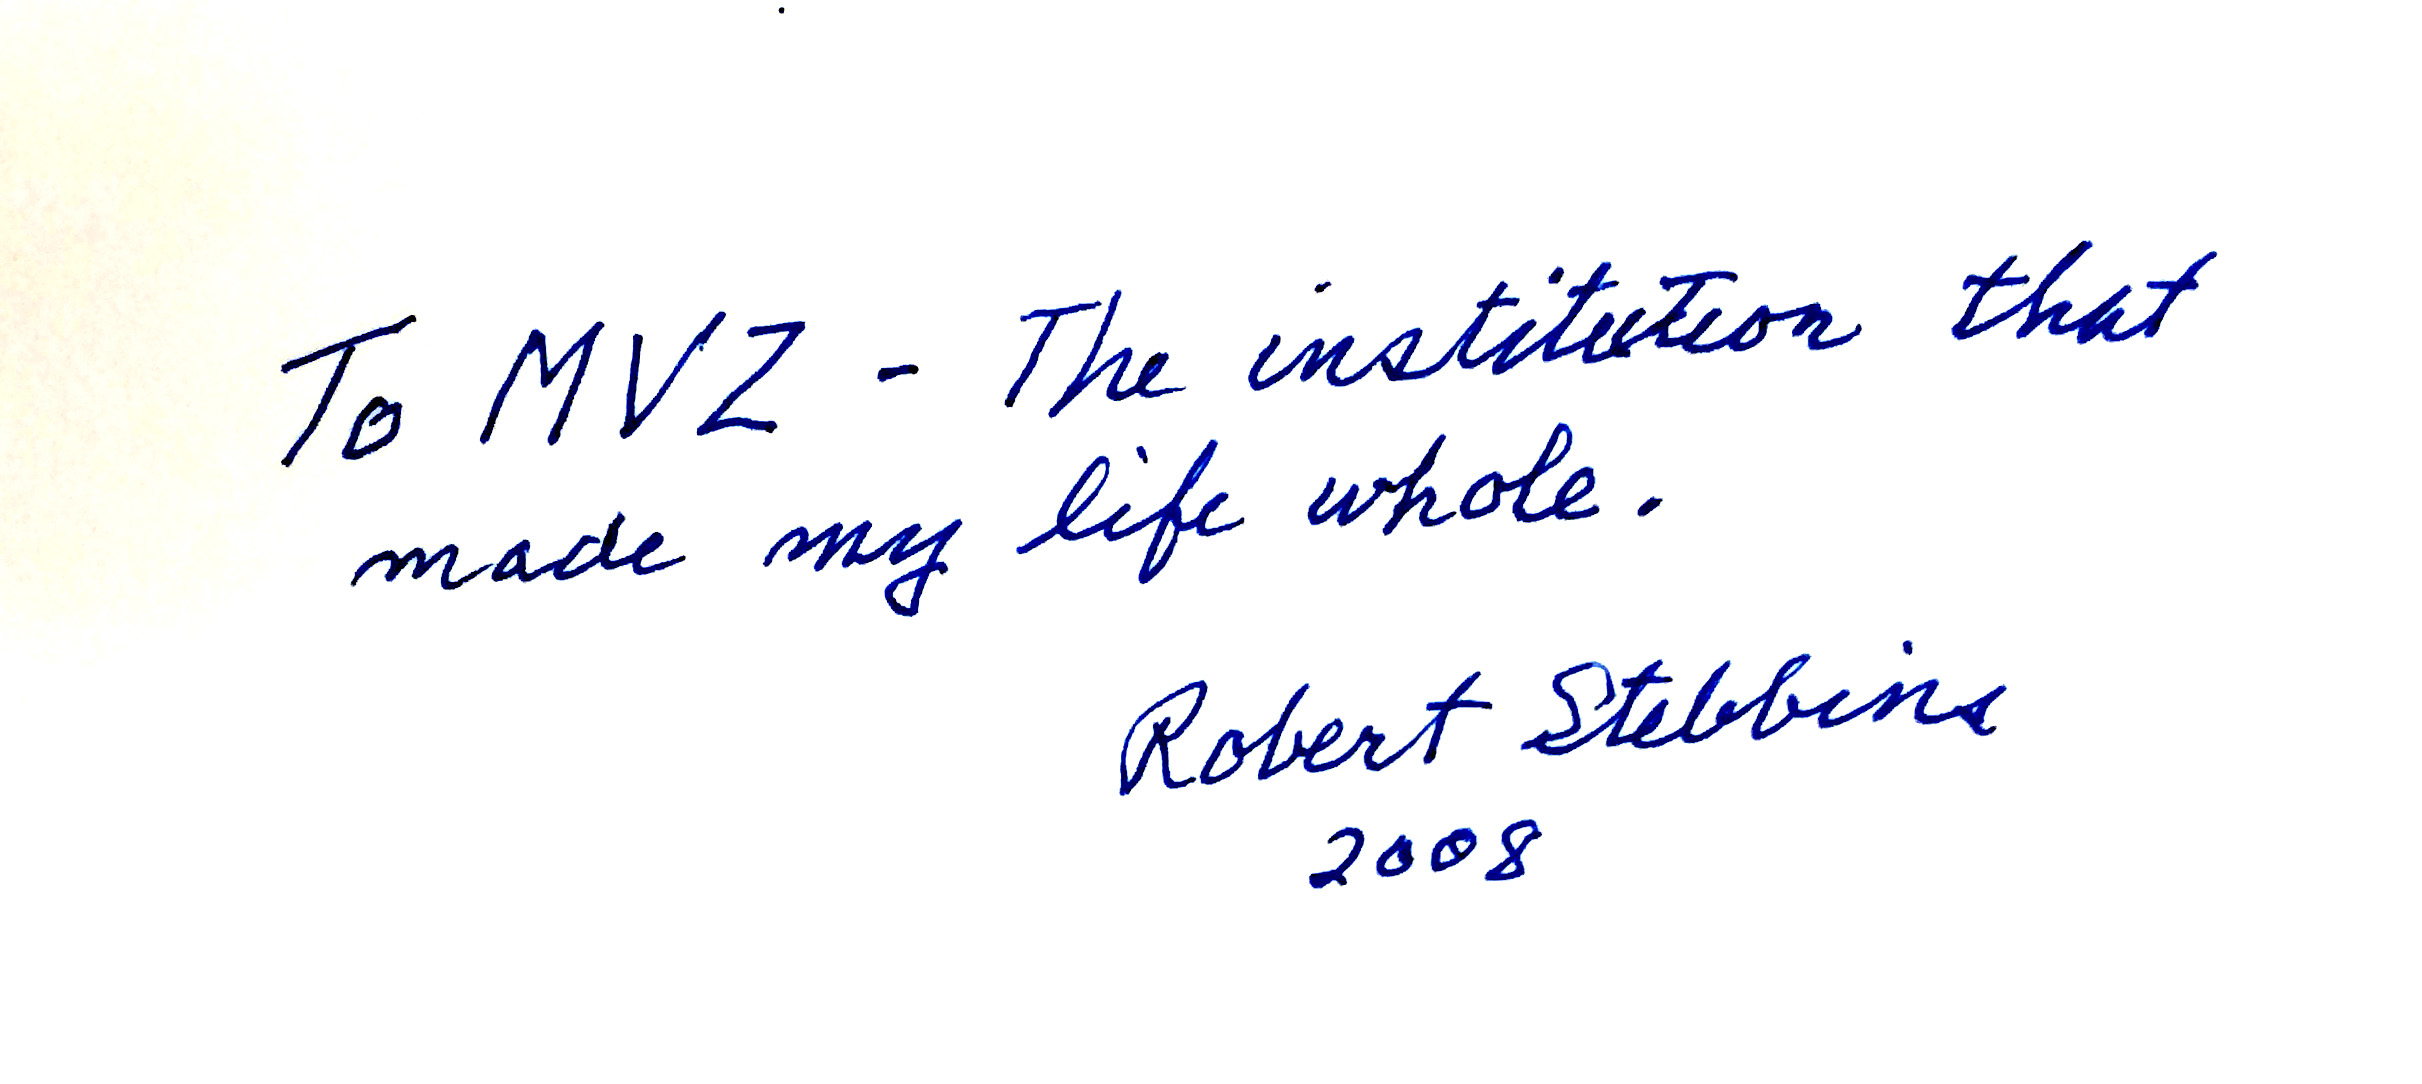 Inscription by Robert C. Stebbins in Animal coloration: activities on the evolution of concealment, 2008.